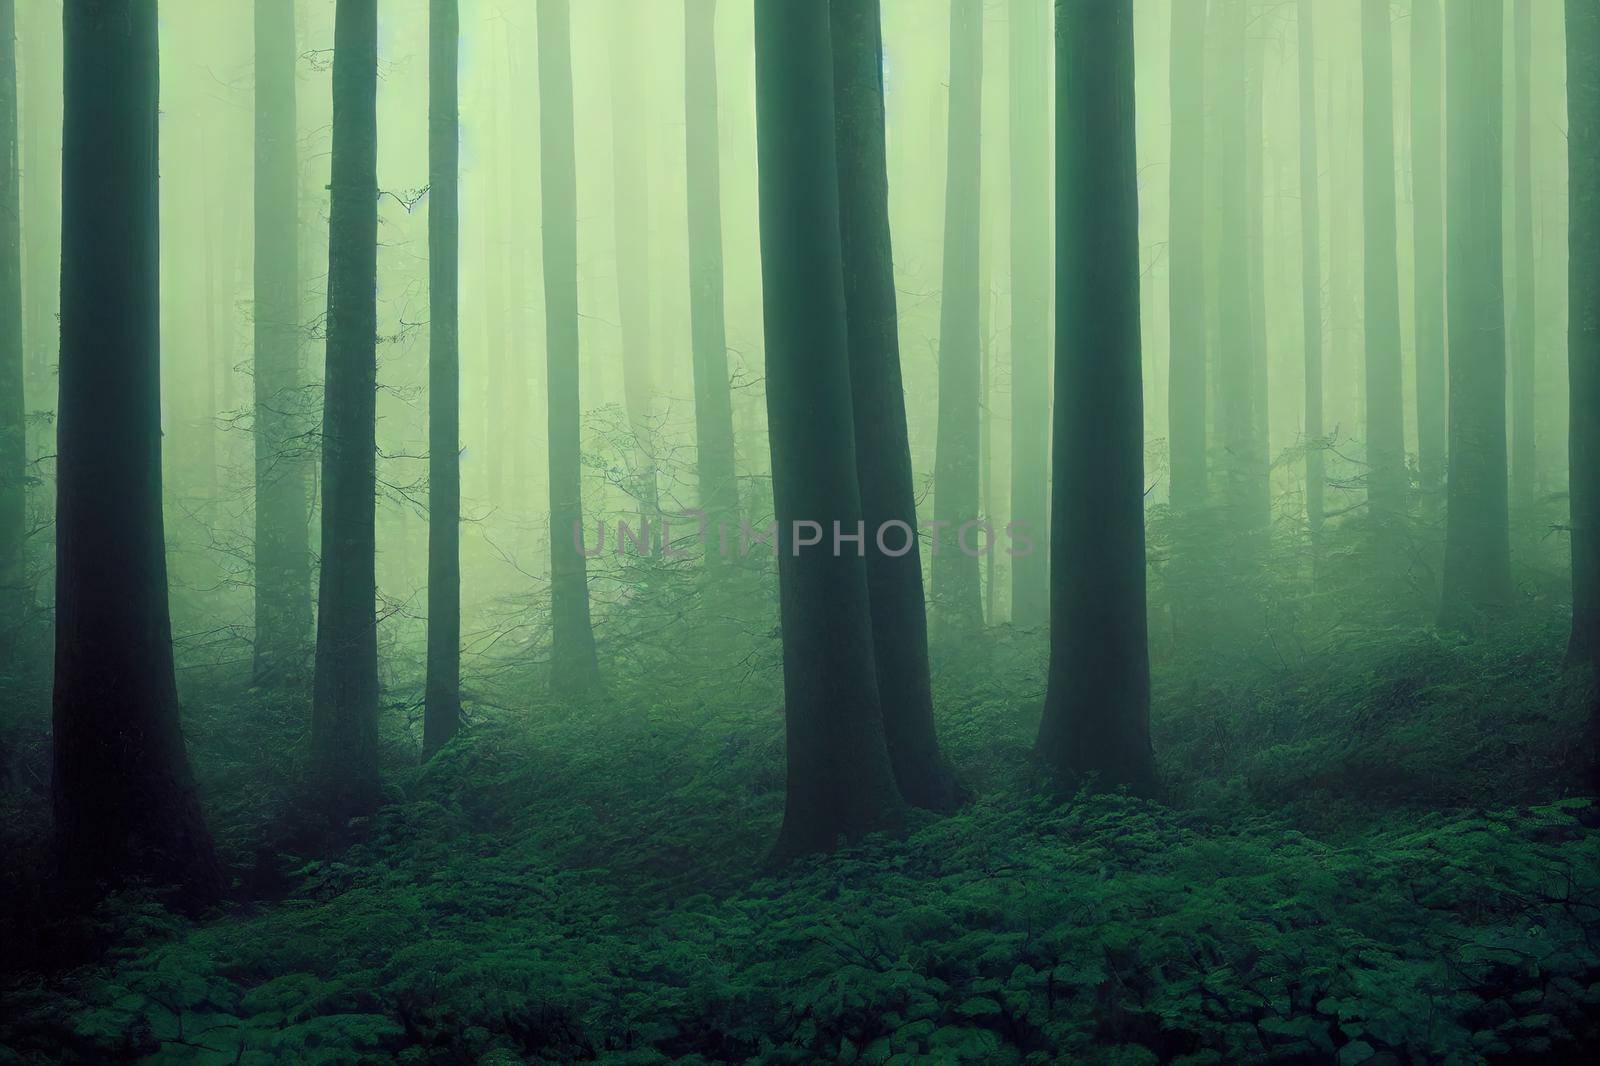 Panorama of the misty forest. Forest mist. Misty forest in fog. Deep forest in mist